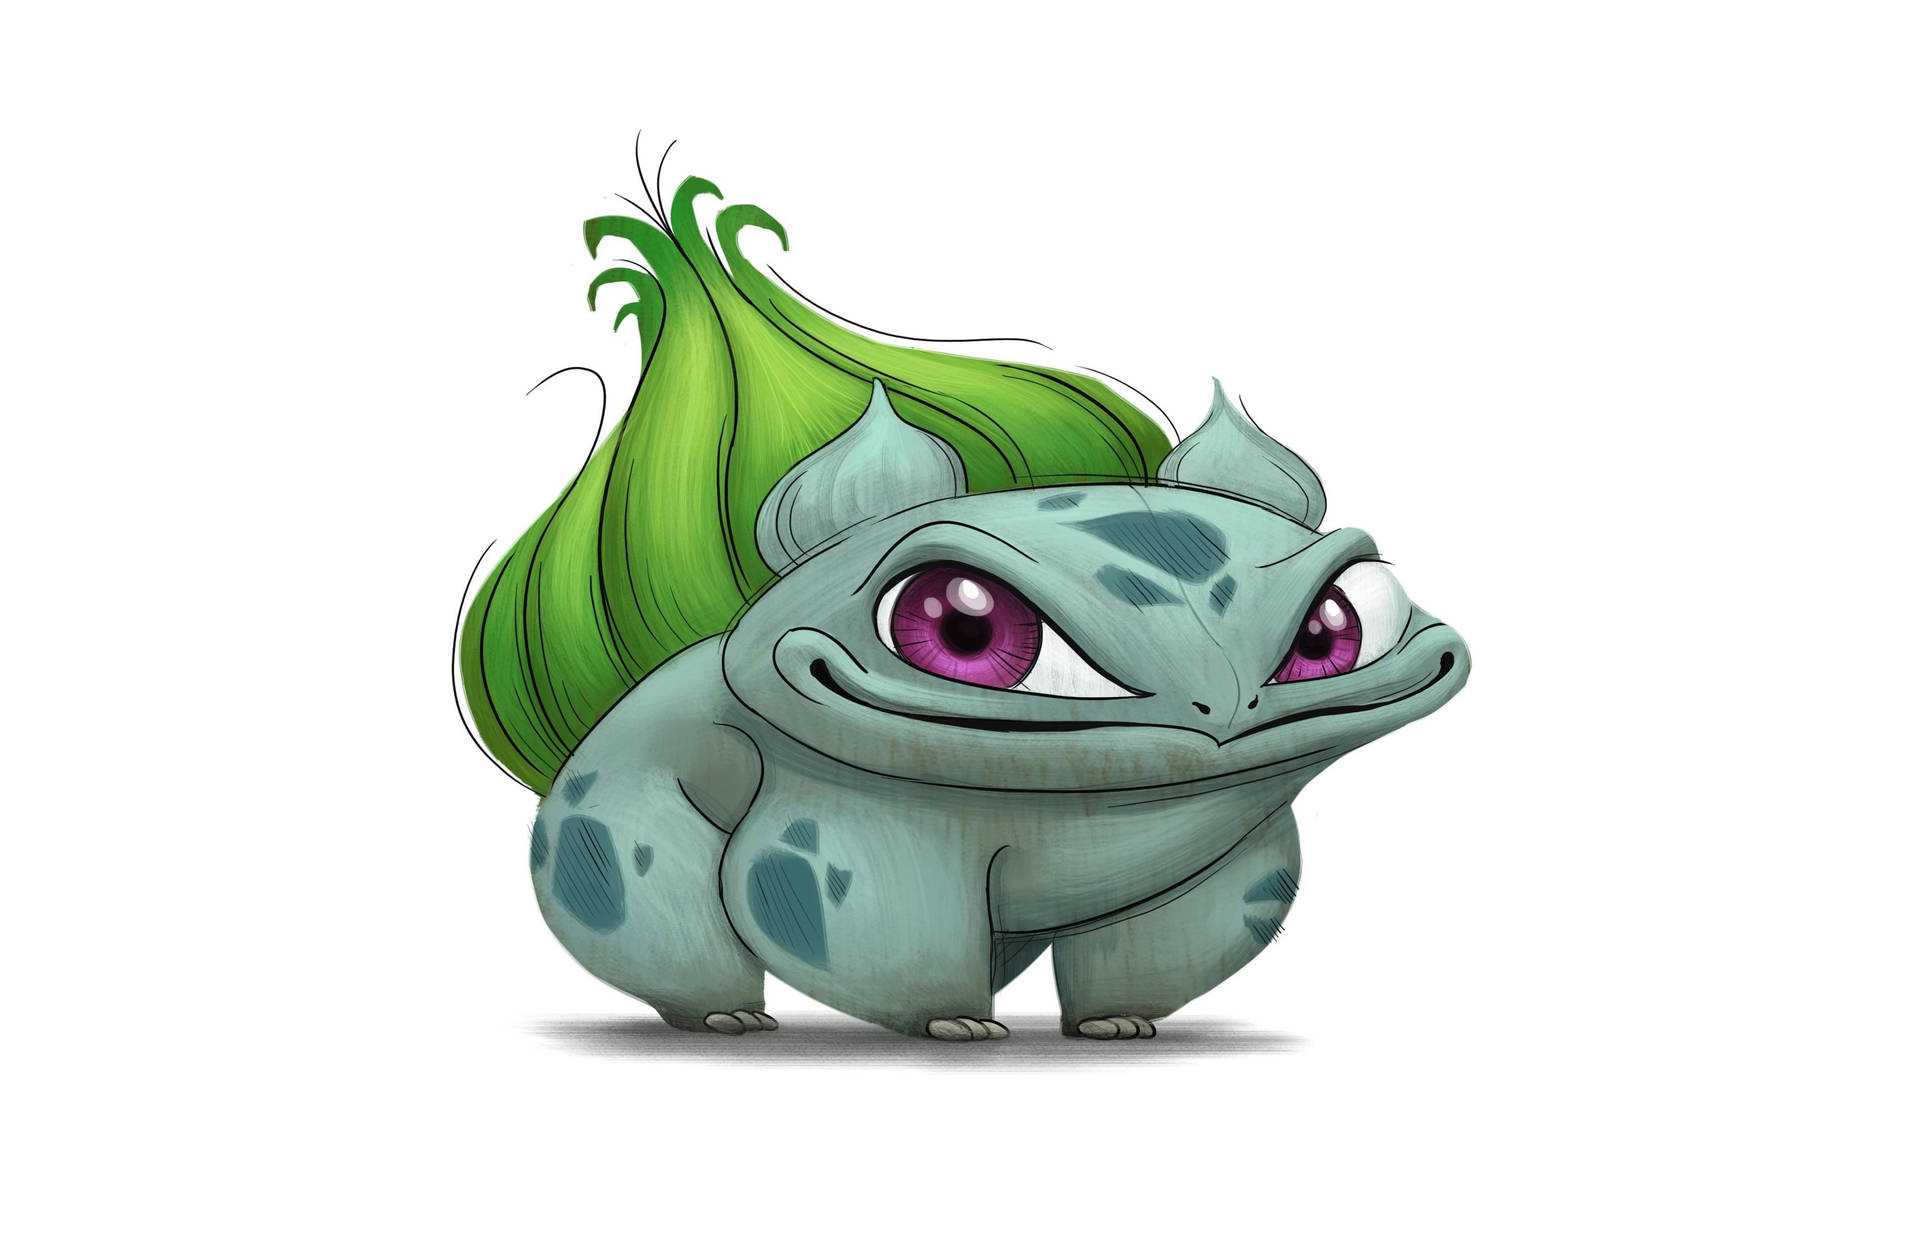 Bulbasaur 3820X2492 Wallpaper and Background Image